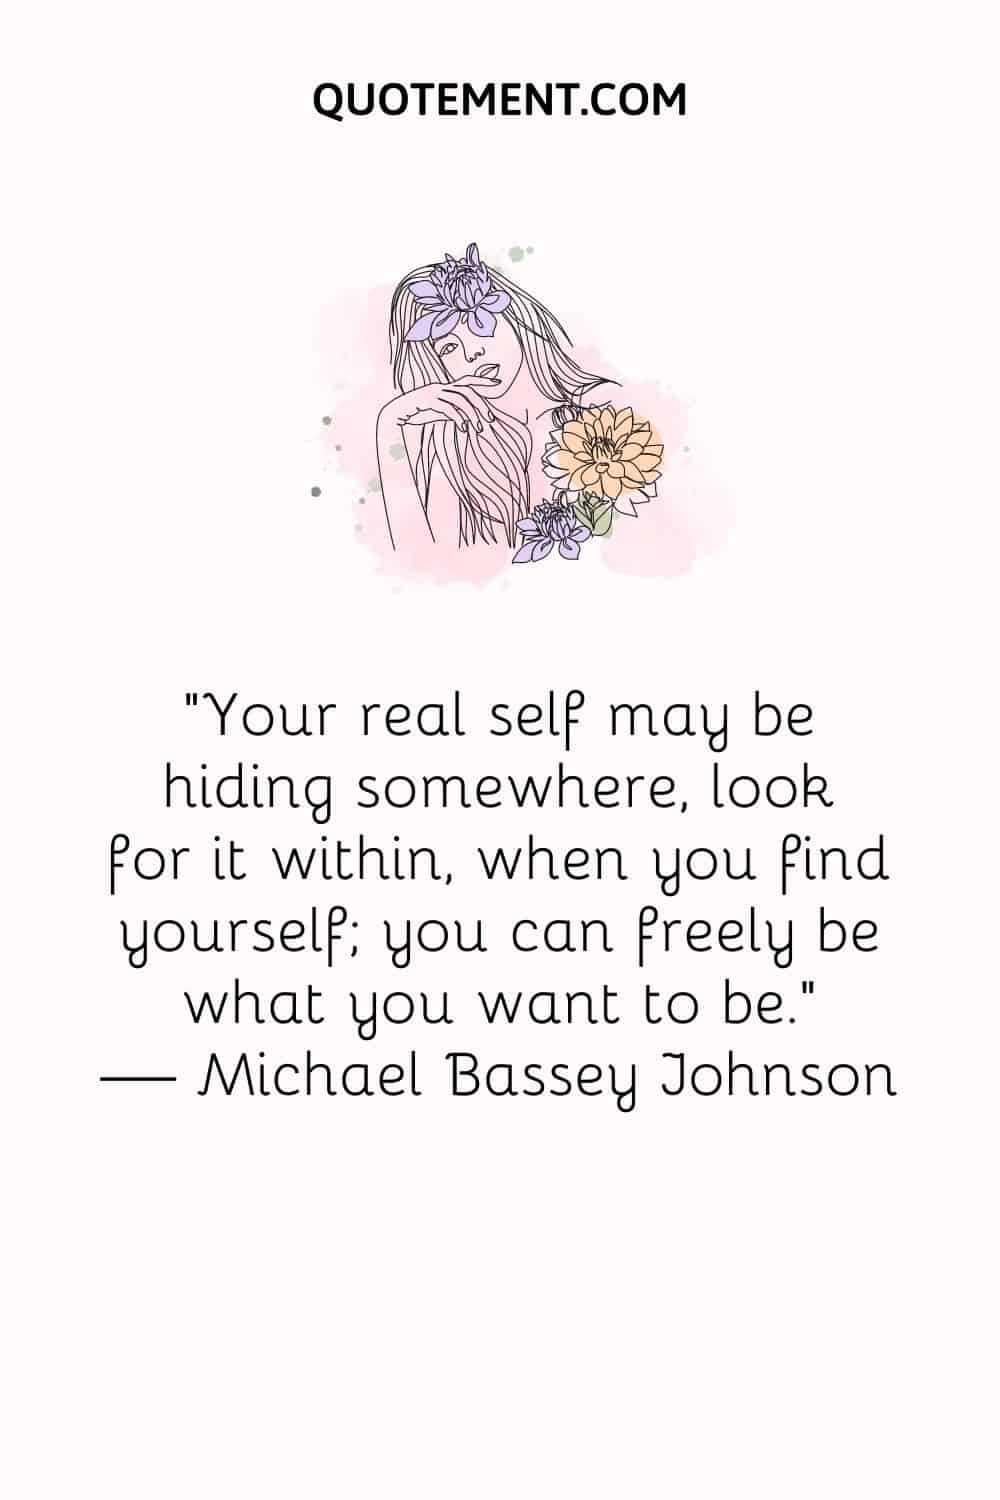 Your real self may be hiding somewhere, look for it within, when you find yourself; you can freely be what you want to be